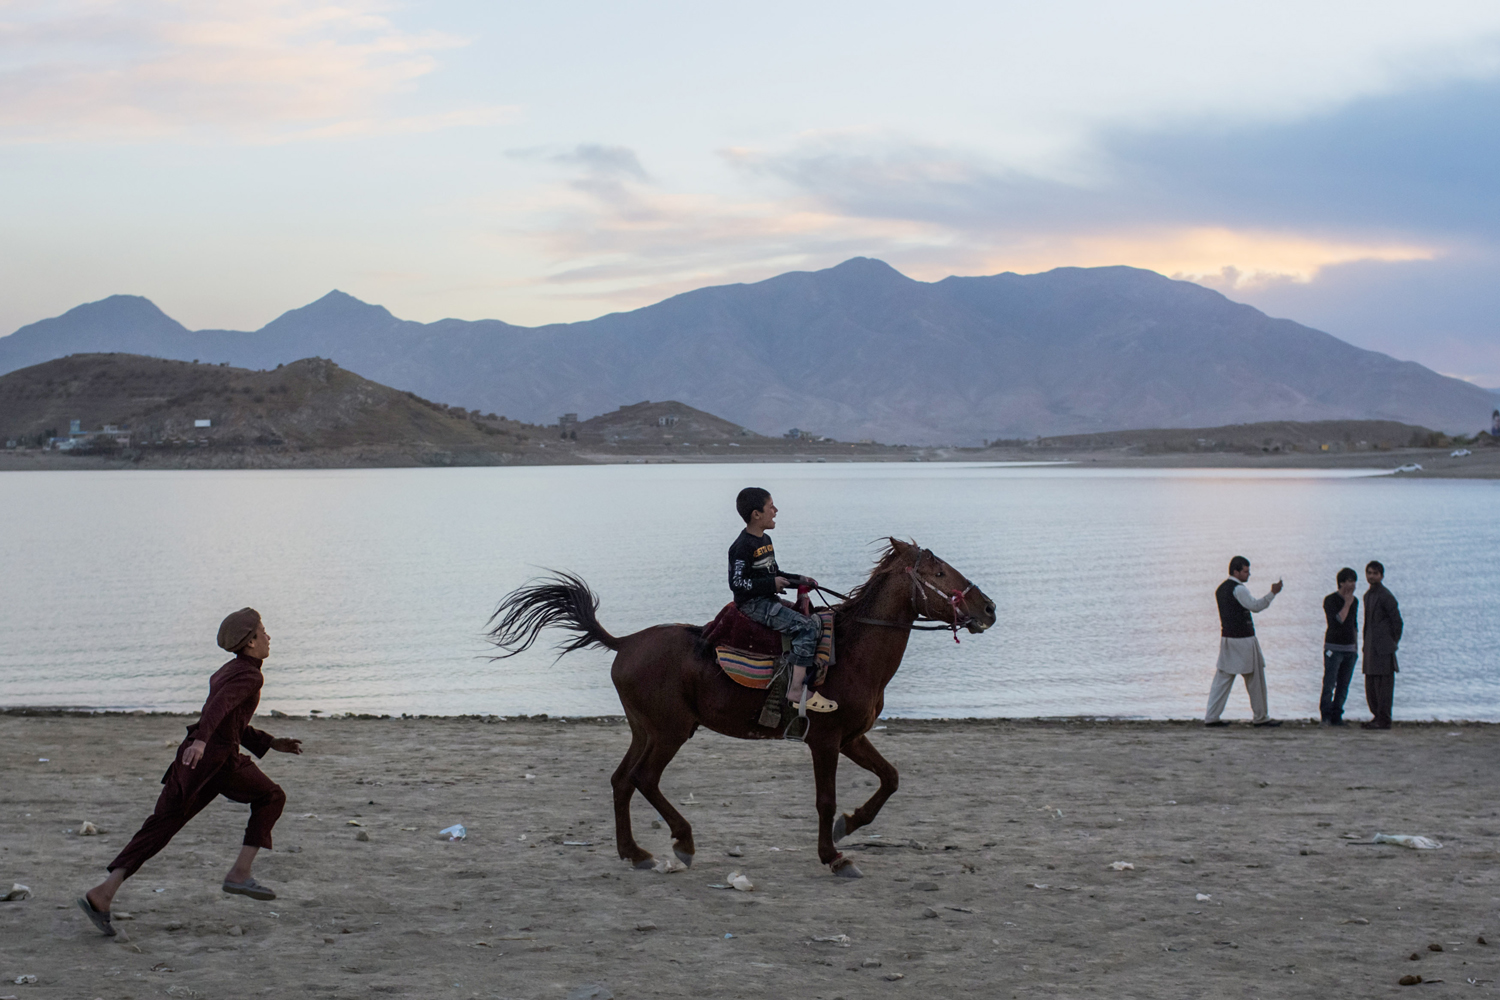 Image: Nov. 9, 2012. An Afghan boy chases his friend riding a horse at the Qargha Lake in Kabul.